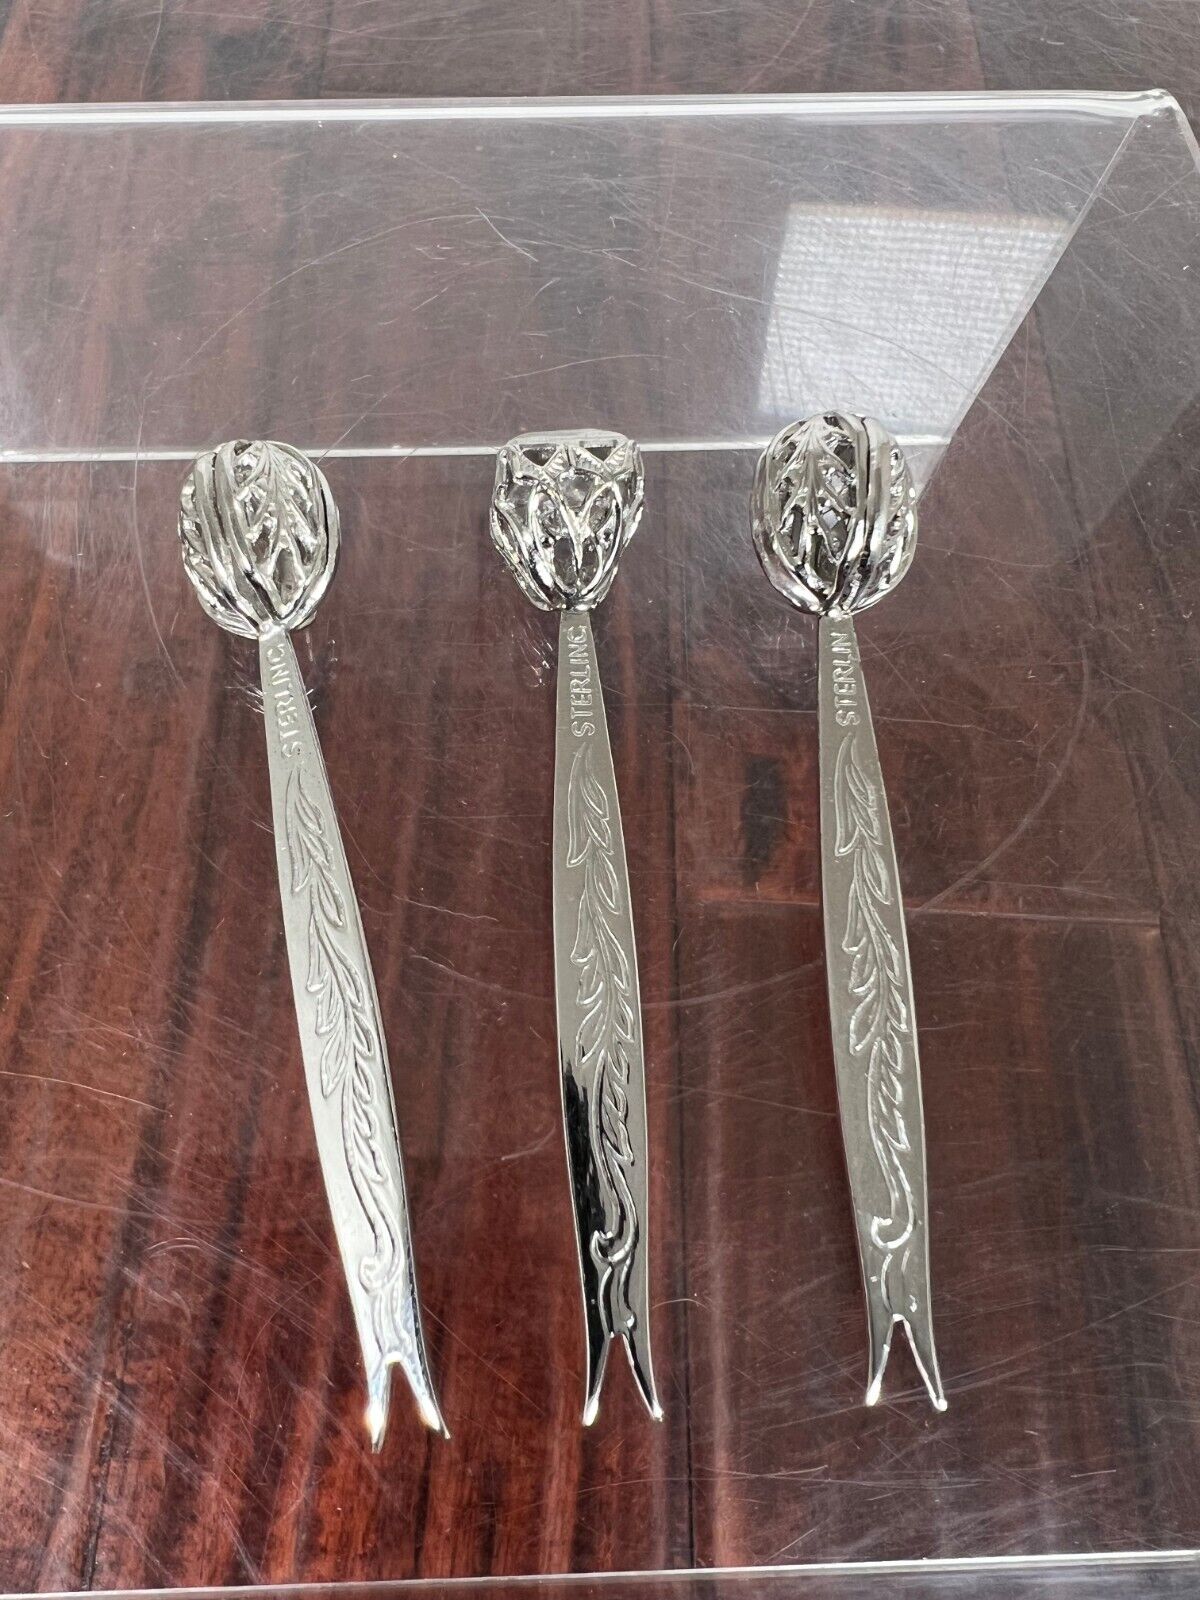 3 STERLING SILVER COCKTAIL PICKS With Decorative Tops, 3”, Stamped Sterling